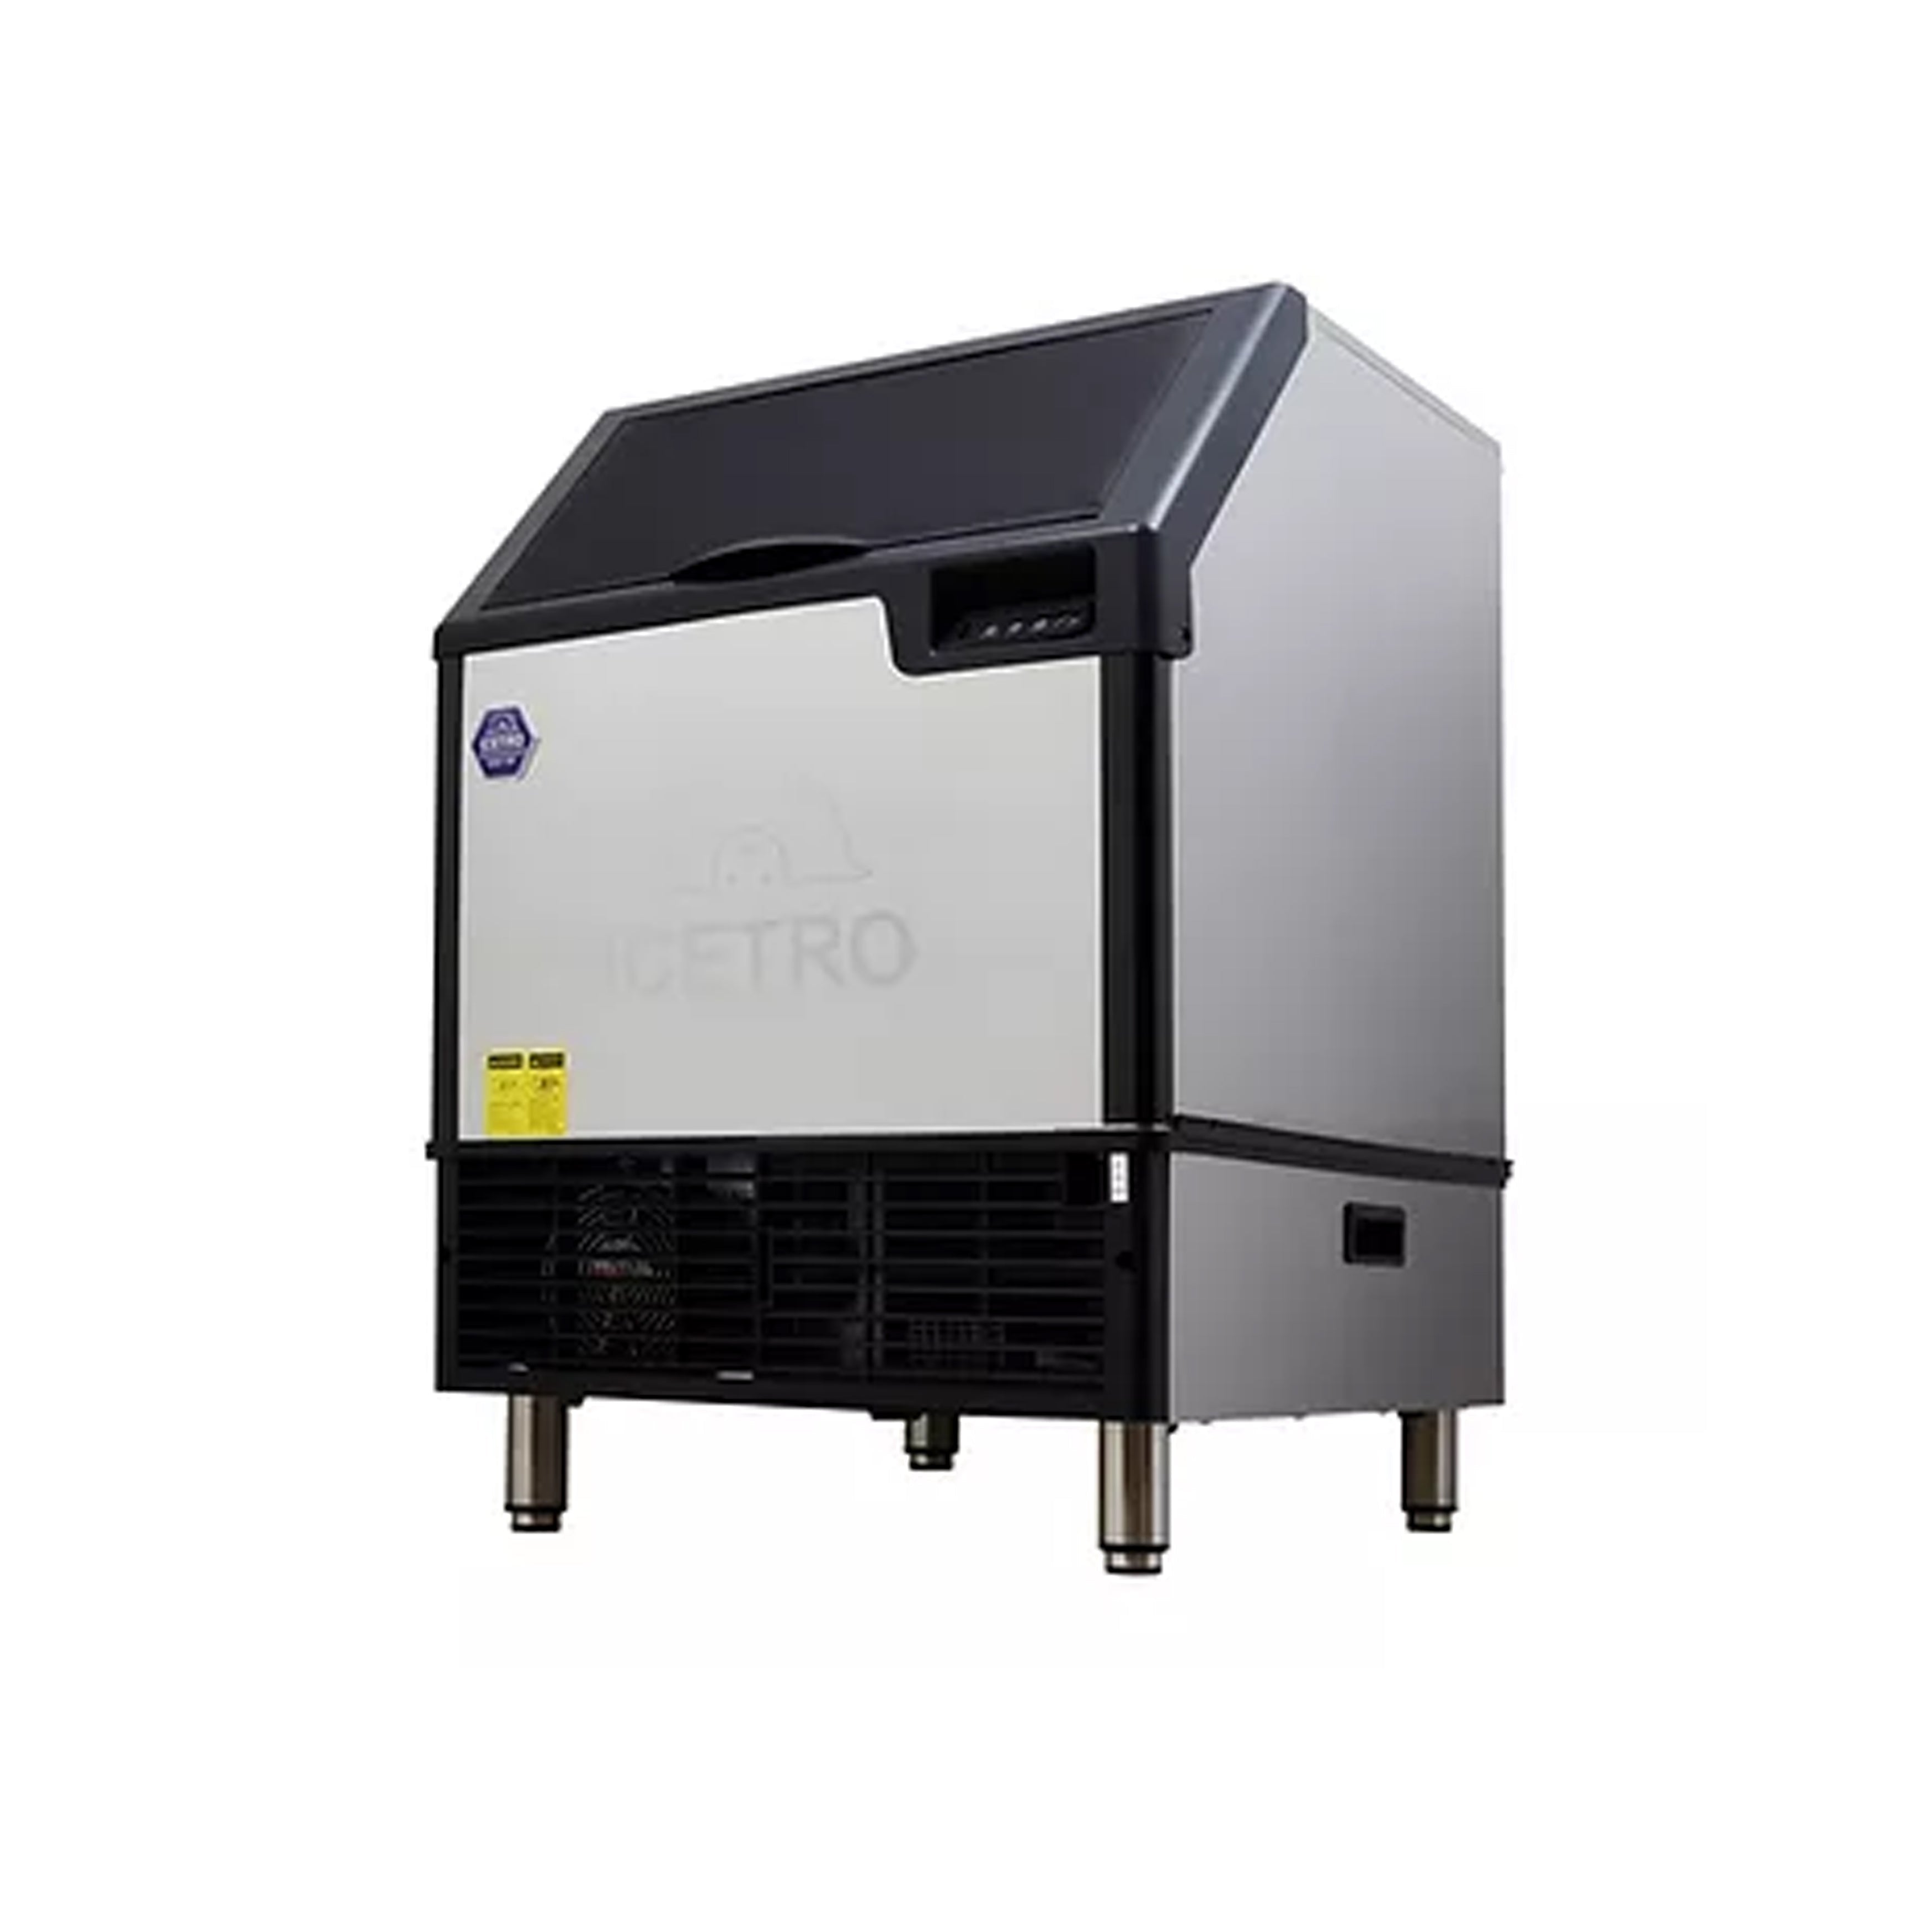 Icetro - IU-0220-AC, Commercial 77lbs Undercounter Air Cooled Ice Machine Ice Cube Maker